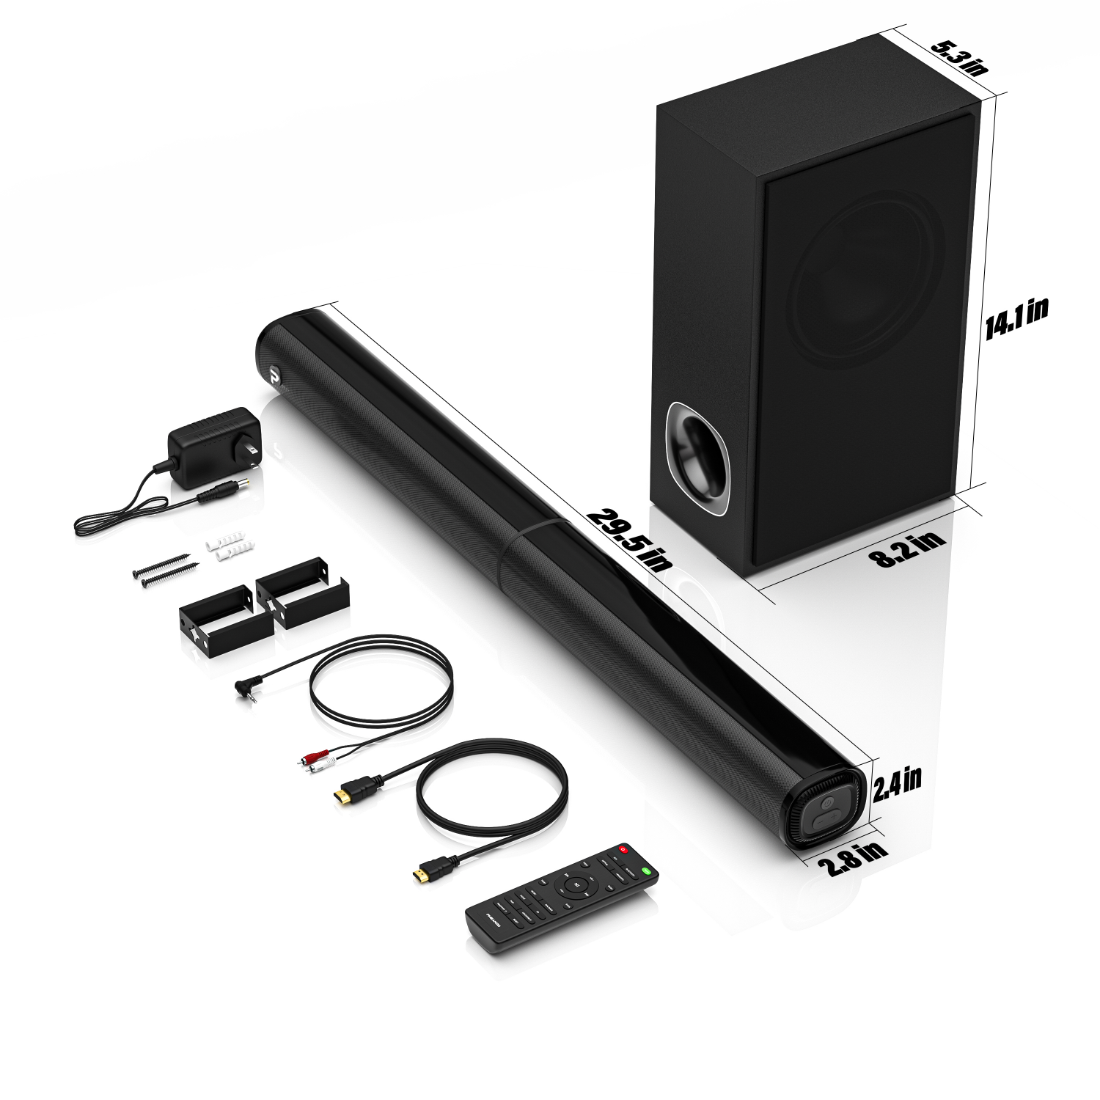  PHEANOO Sound Bar with 【Dolby】, 2.1 CH TV Soundbar with  Subwoofer Works with 4K&HD TVs (D2, 200W) : Electronics